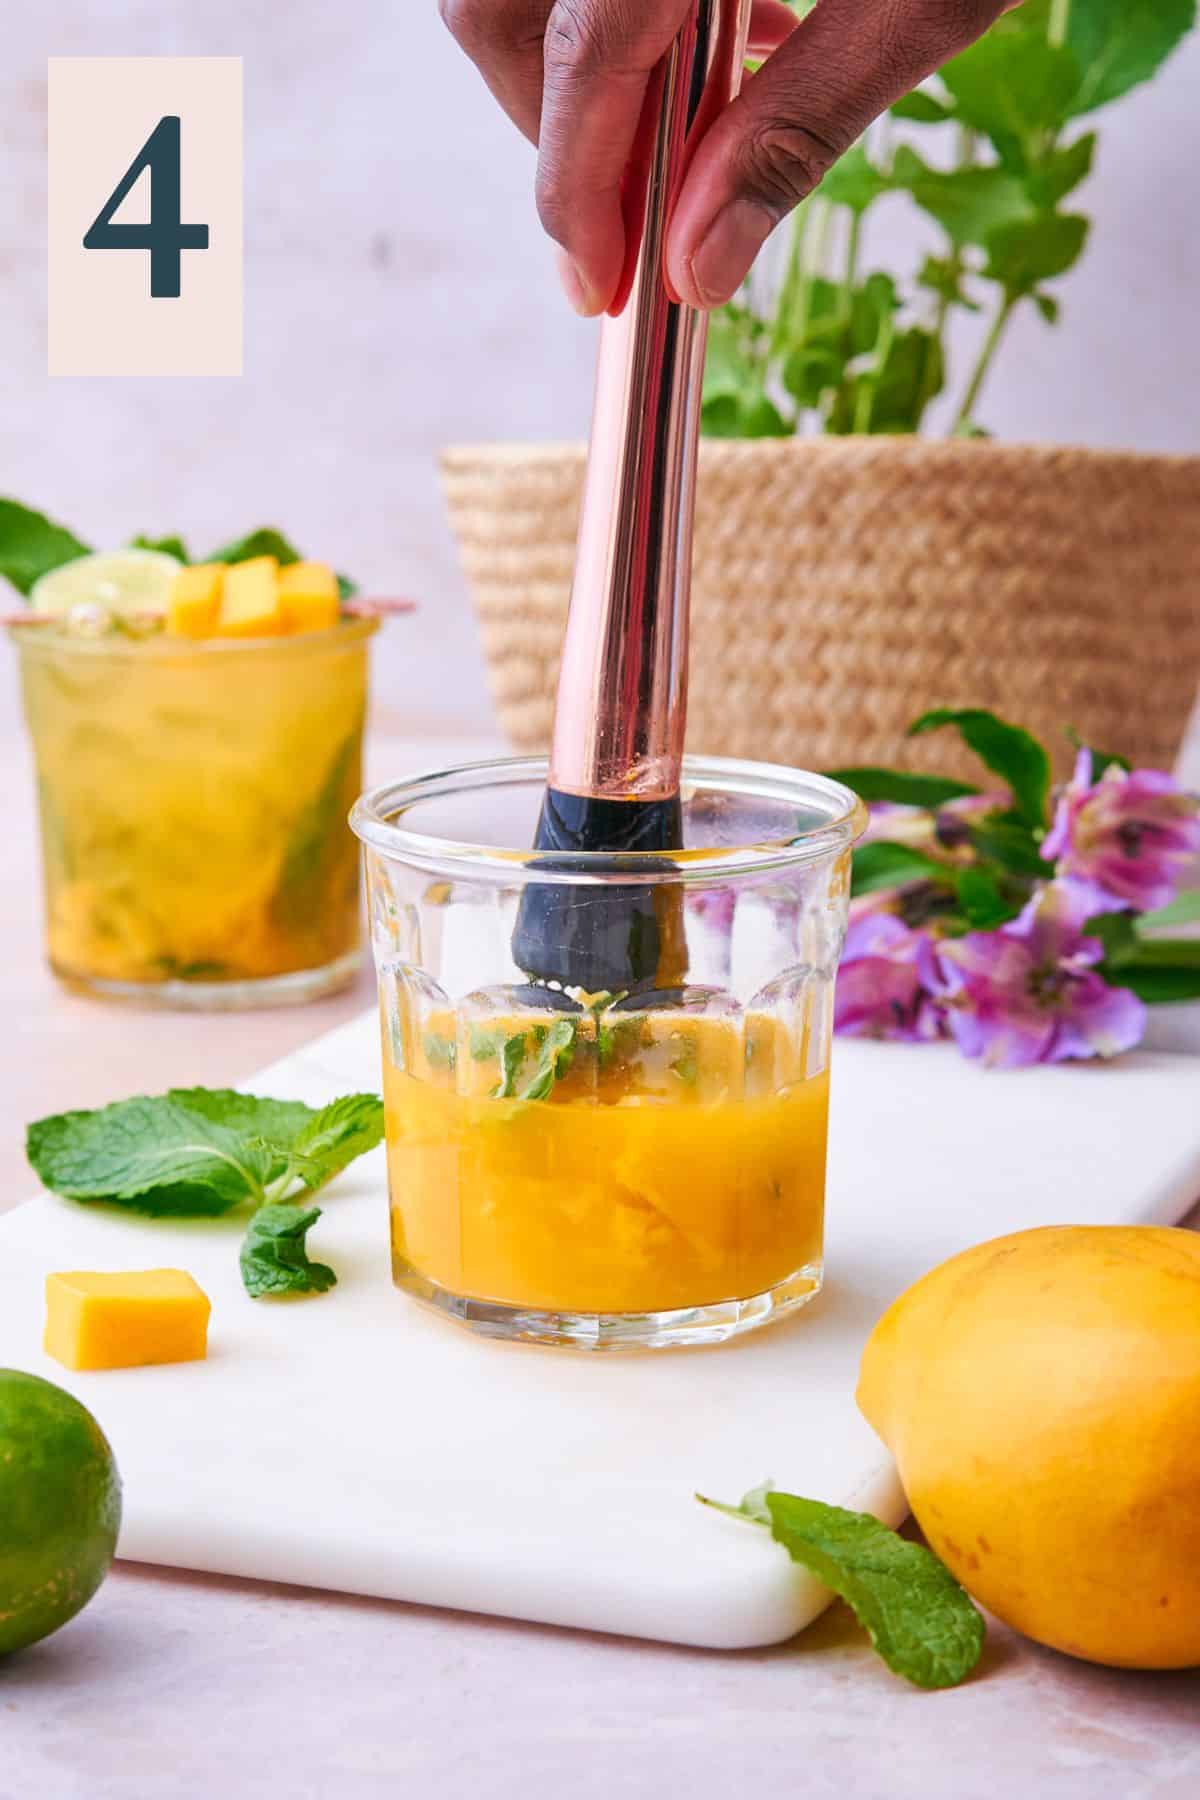 Muddling the mangos, mint leaves, and other ingredients until well incorporated into the cocktail.